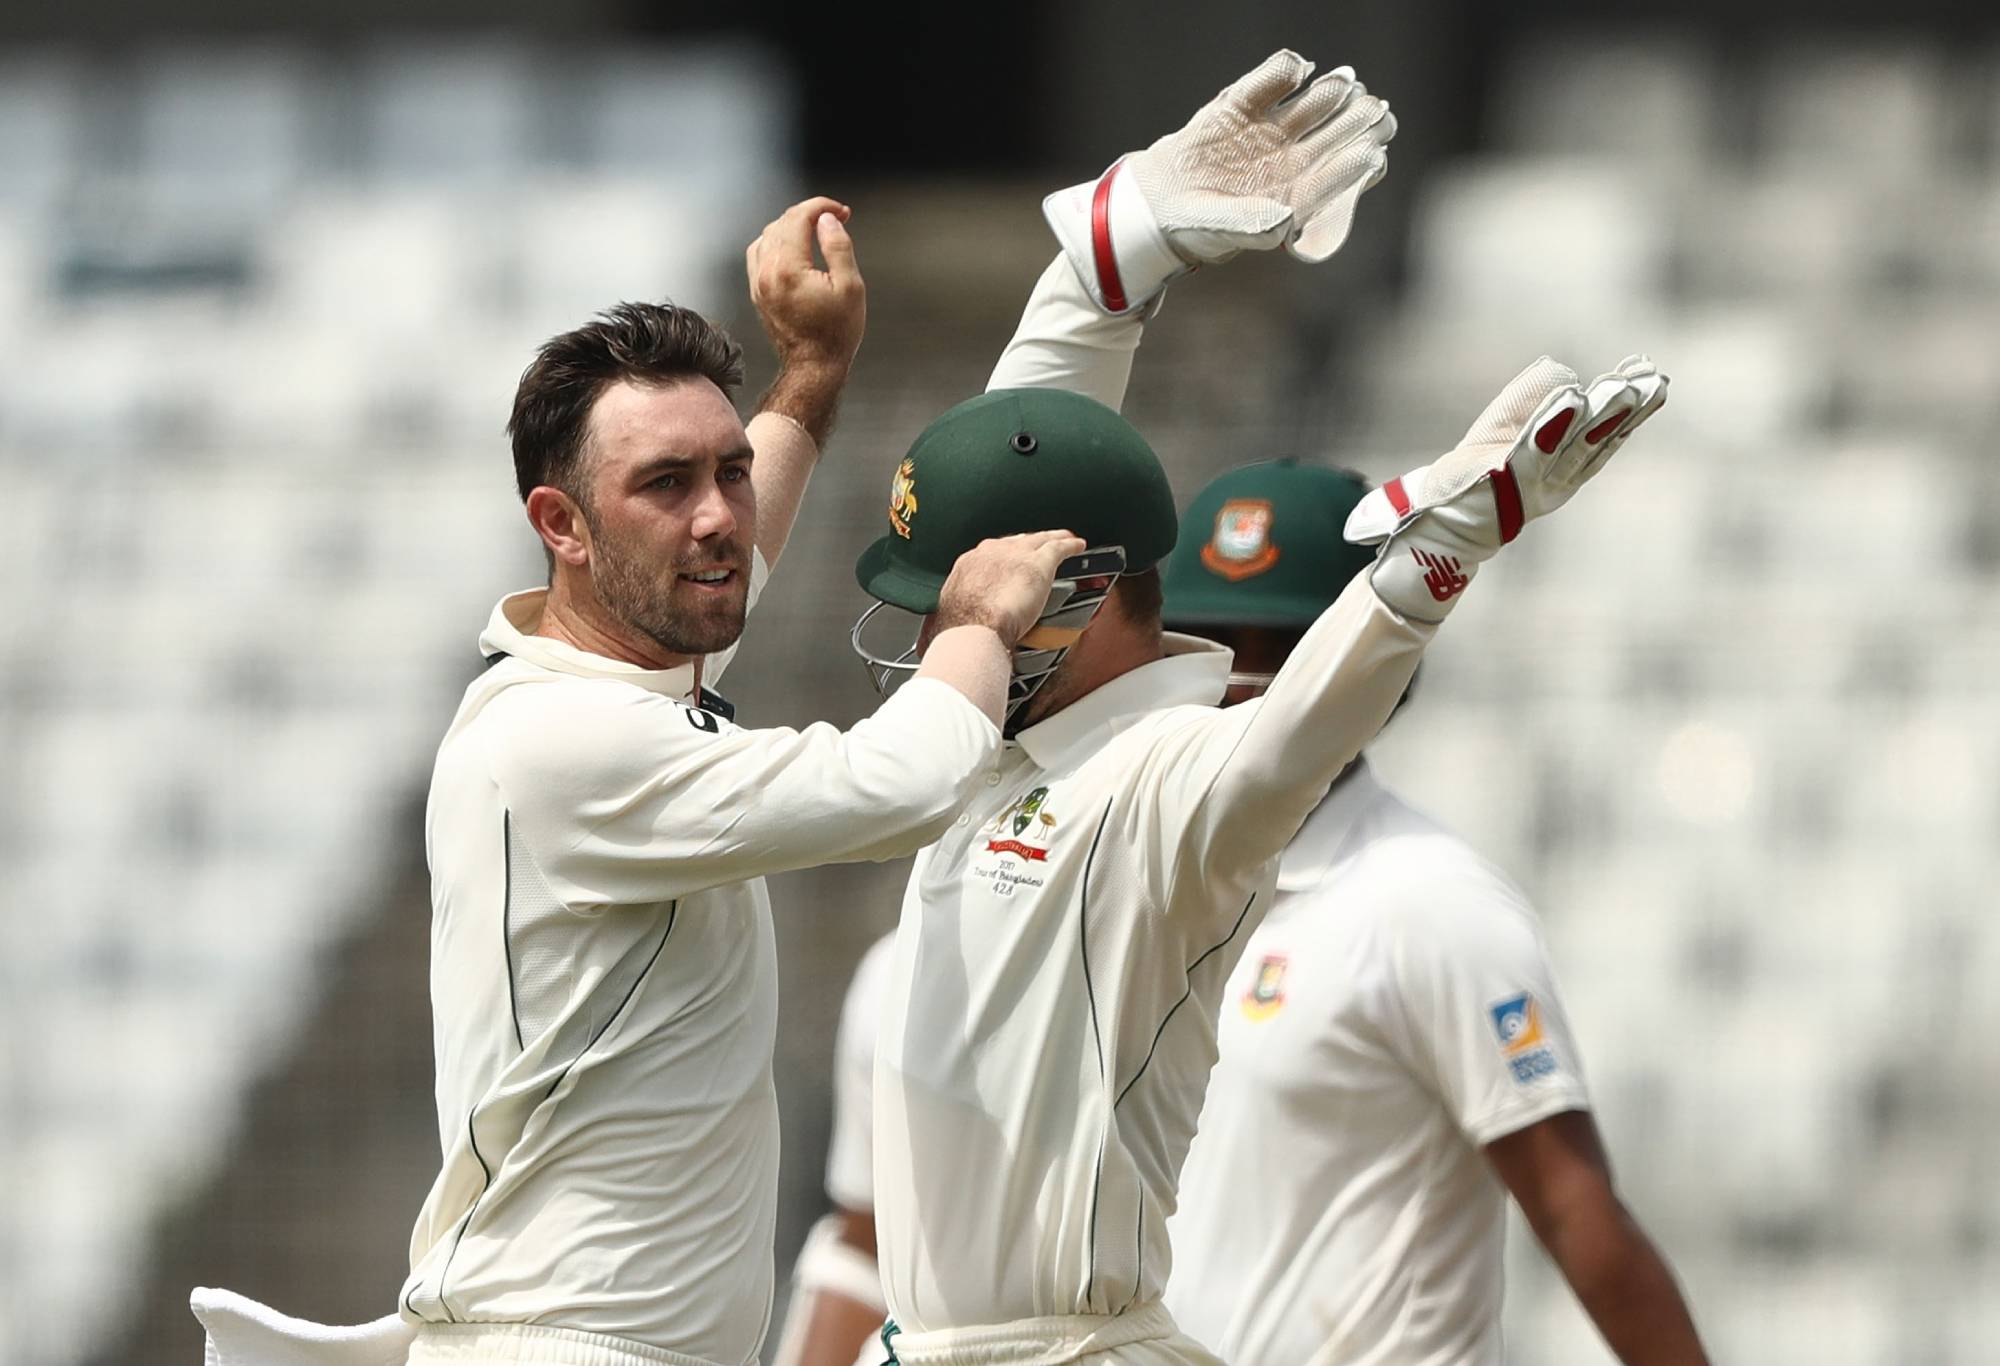 MIRPUR, BANGLADESH - AUGUST 27: Glenn Maxwell of Australia celebrates taking the wicket of Tamim Iqbal Khan of Bangladesh during day one of the First Test match between Bangladesh and Australia at Shere Bangla National Stadium on August 27, 2017 in Mirpur, Bangladesh. (Photo by Robert Cianflone/Getty Images)